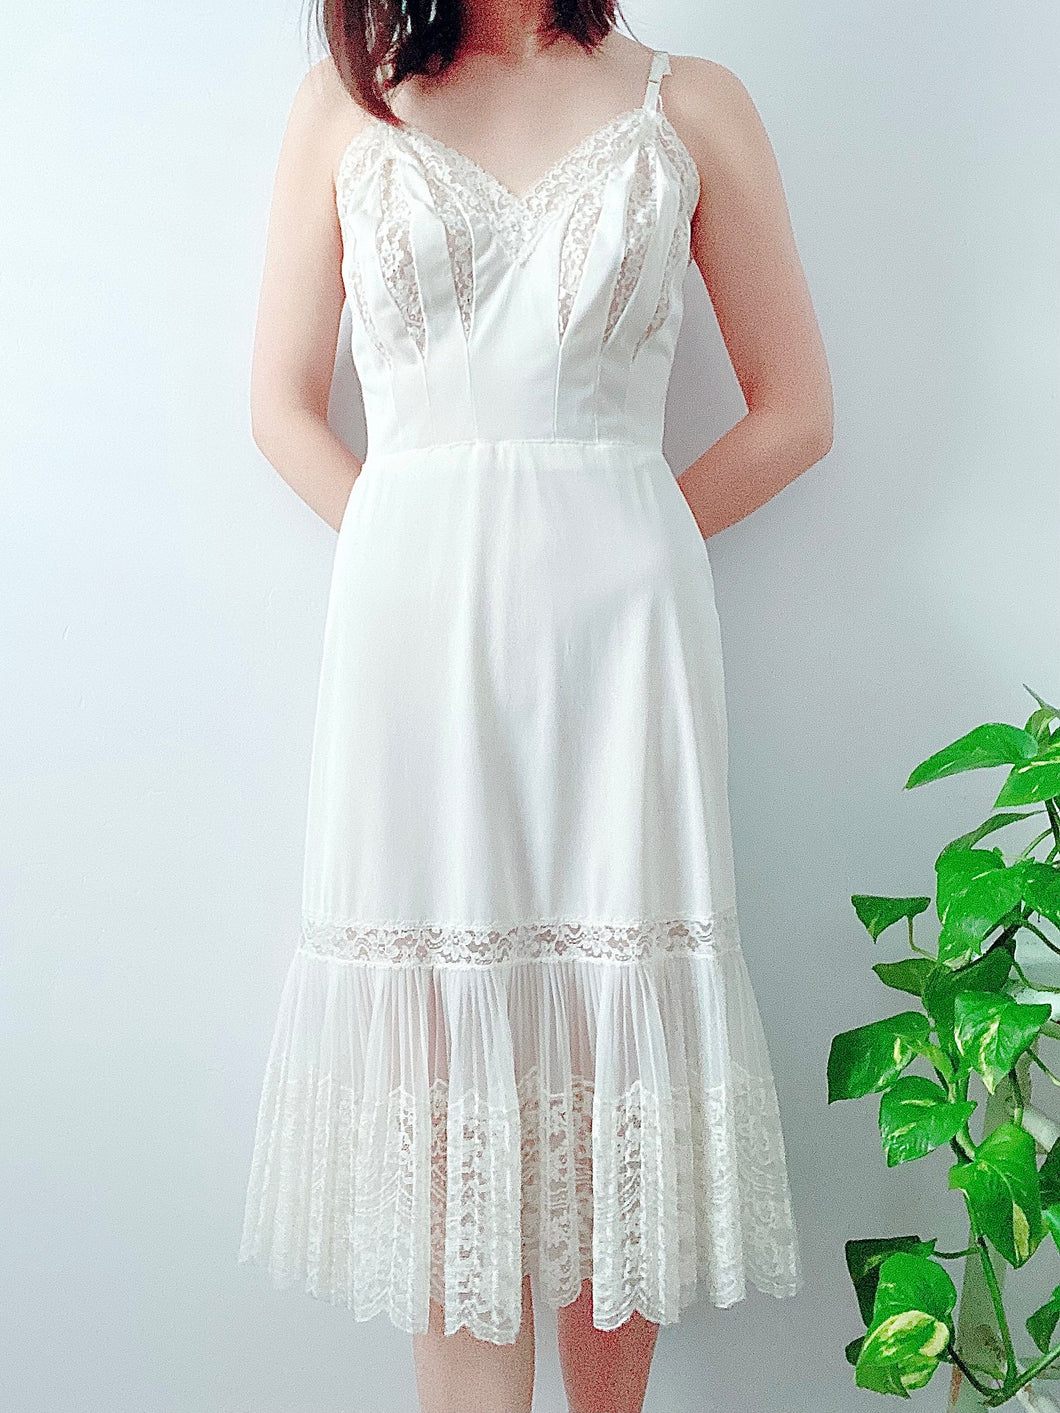 Vintage 1940s Lace Slip with Cutout Design and Pleated Flounce